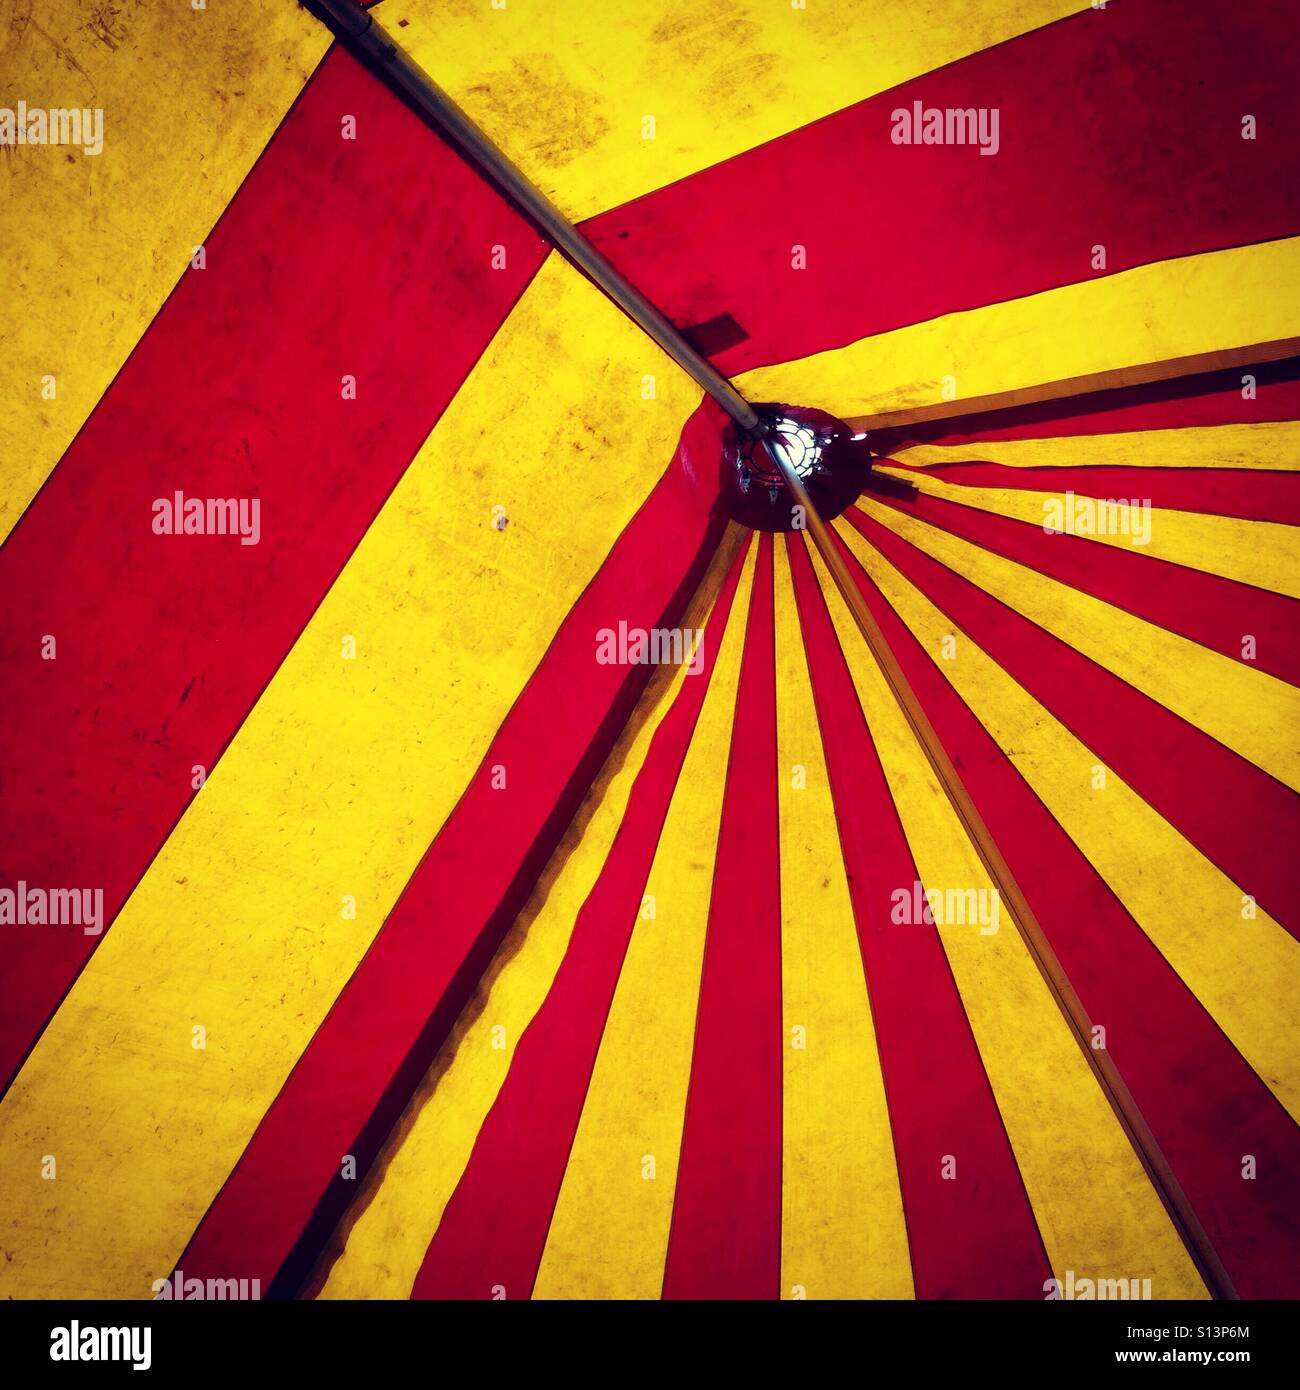 The inside of a red and yellow big top circus tent Stock Photo